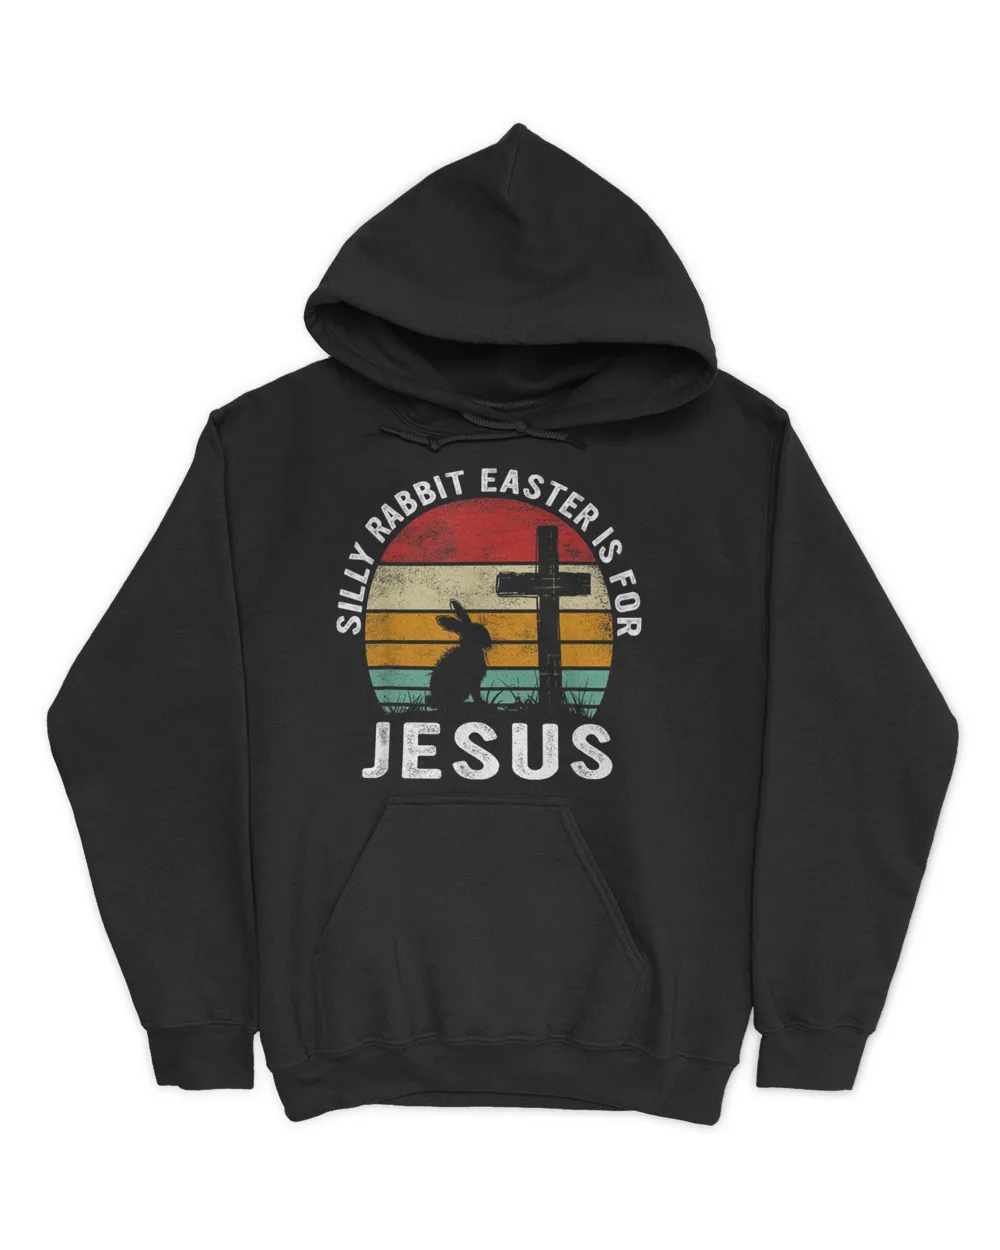 Silly Rabbit Easter Is For Jesus Religious Happy Easter Day T-Shirt